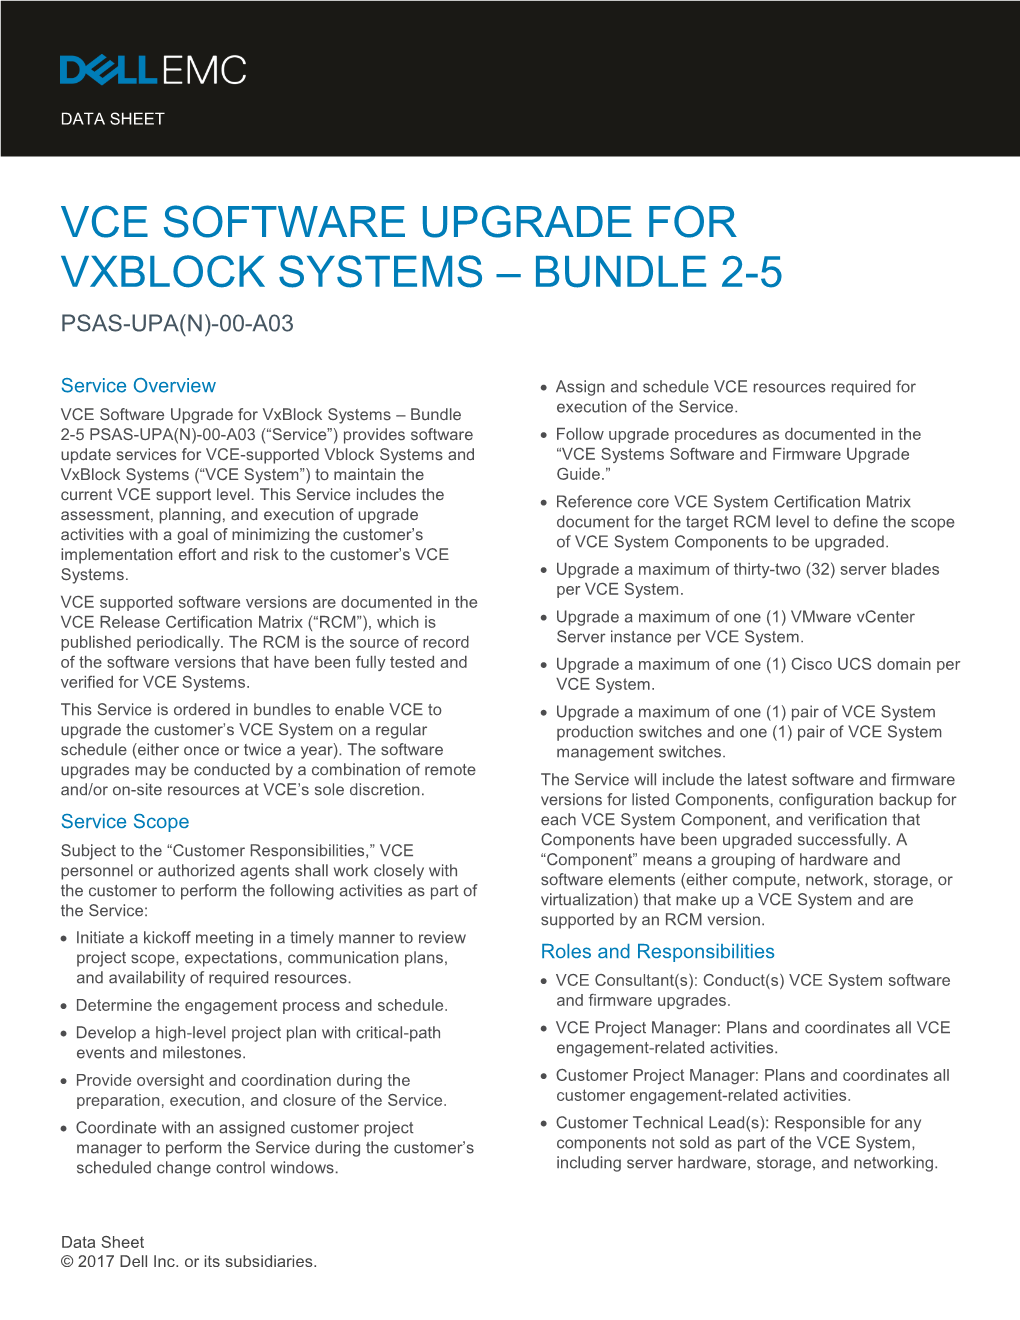 Vce Software Upgrade for Vxblock Systems – Bundle 2-5 Psas-Upa(N)-00-A03